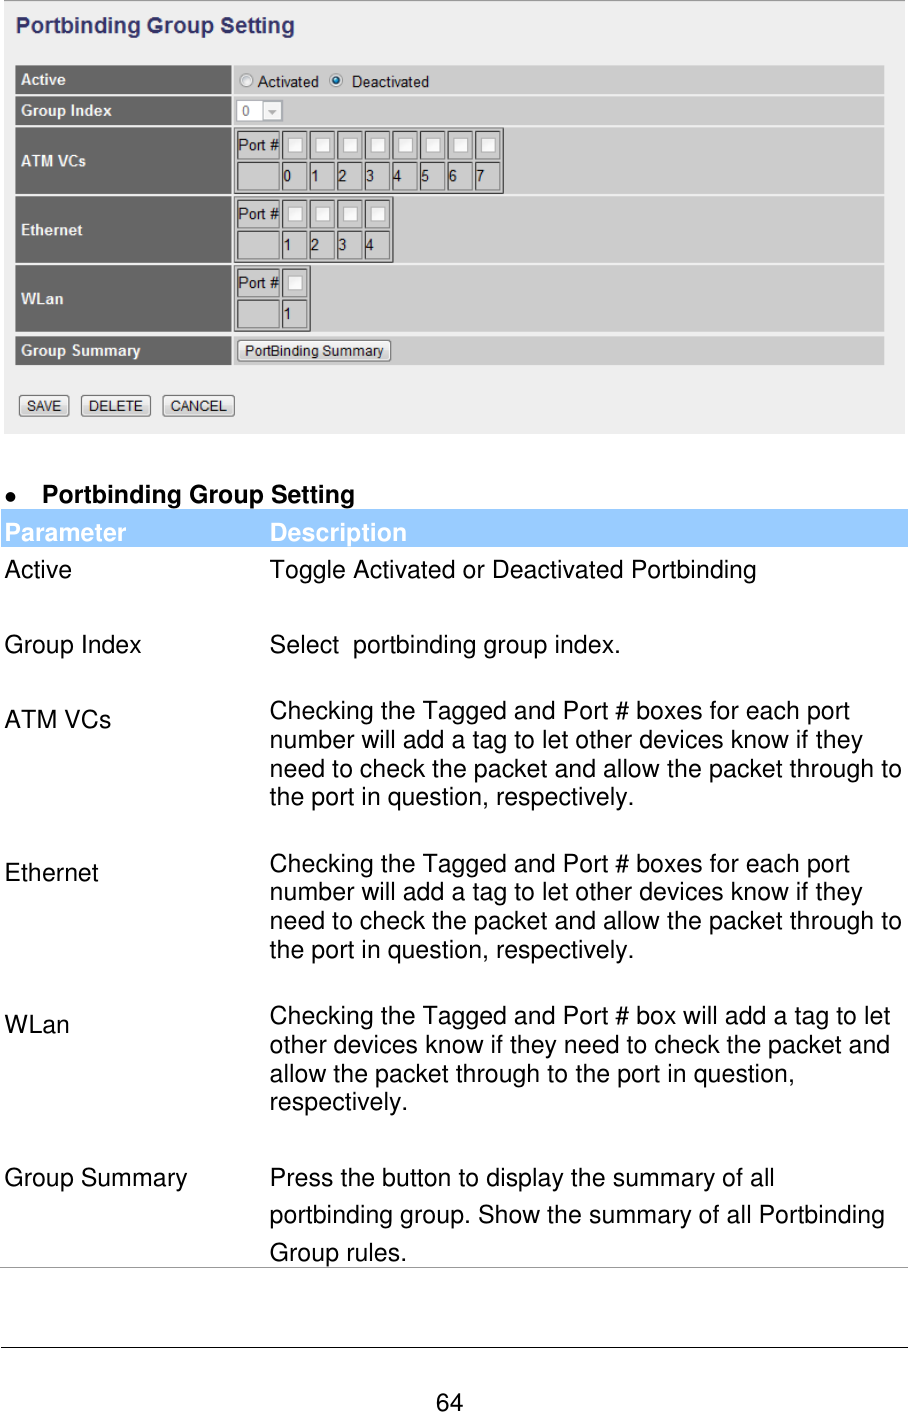   64    Portbinding Group Setting Parameter Description Active Toggle Activated or Deactivated Portbinding   Group Index Select  portbinding group index.   ATM VCs Checking the Tagged and Port # boxes for each port number will add a tag to let other devices know if they need to check the packet and allow the packet through to the port in question, respectively.   Ethernet Checking the Tagged and Port # boxes for each port number will add a tag to let other devices know if they need to check the packet and allow the packet through to the port in question, respectively.   WLan Checking the Tagged and Port # box will add a tag to let other devices know if they need to check the packet and allow the packet through to the port in question, respectively.   Group Summary Press the button to display the summary of all portbinding group. Show the summary of all Portbinding Group rules.   